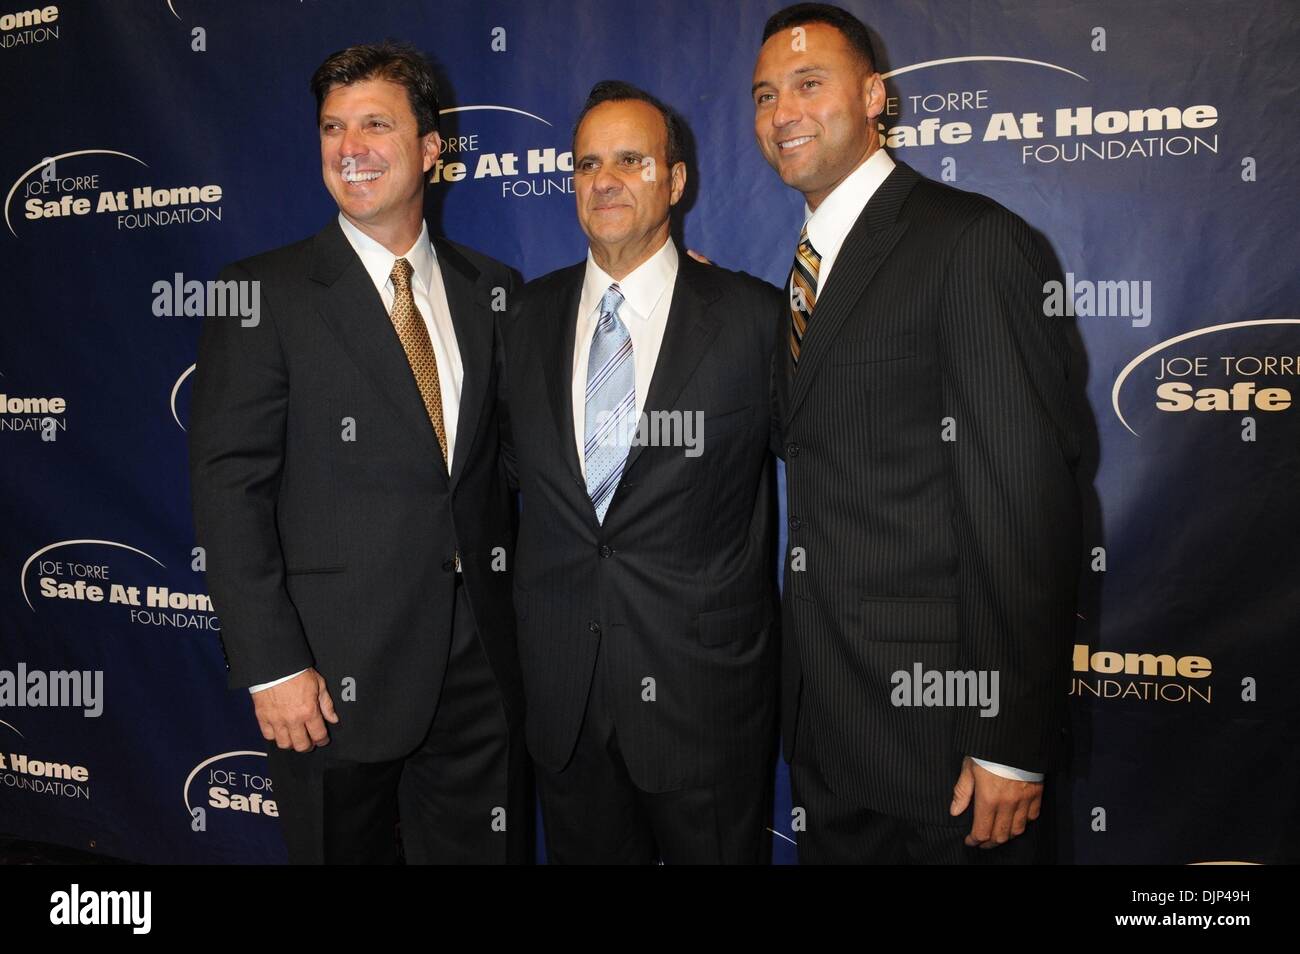 Nov 07, 2008 - Manhattan, New York, USA - TINO MARTINEZ, JOE TORRE and DEREK JETER.  Joe and Ali Torre. Joe Torre hosts 'Safe At Home Foundation' Gala at Pier 60, Chelsea Piers.  (Credit Image: Â© Bryan Smith/ZUMA Press) RESTRICTIONS:  * New York City Newspapers Rights OUT * Stock Photo